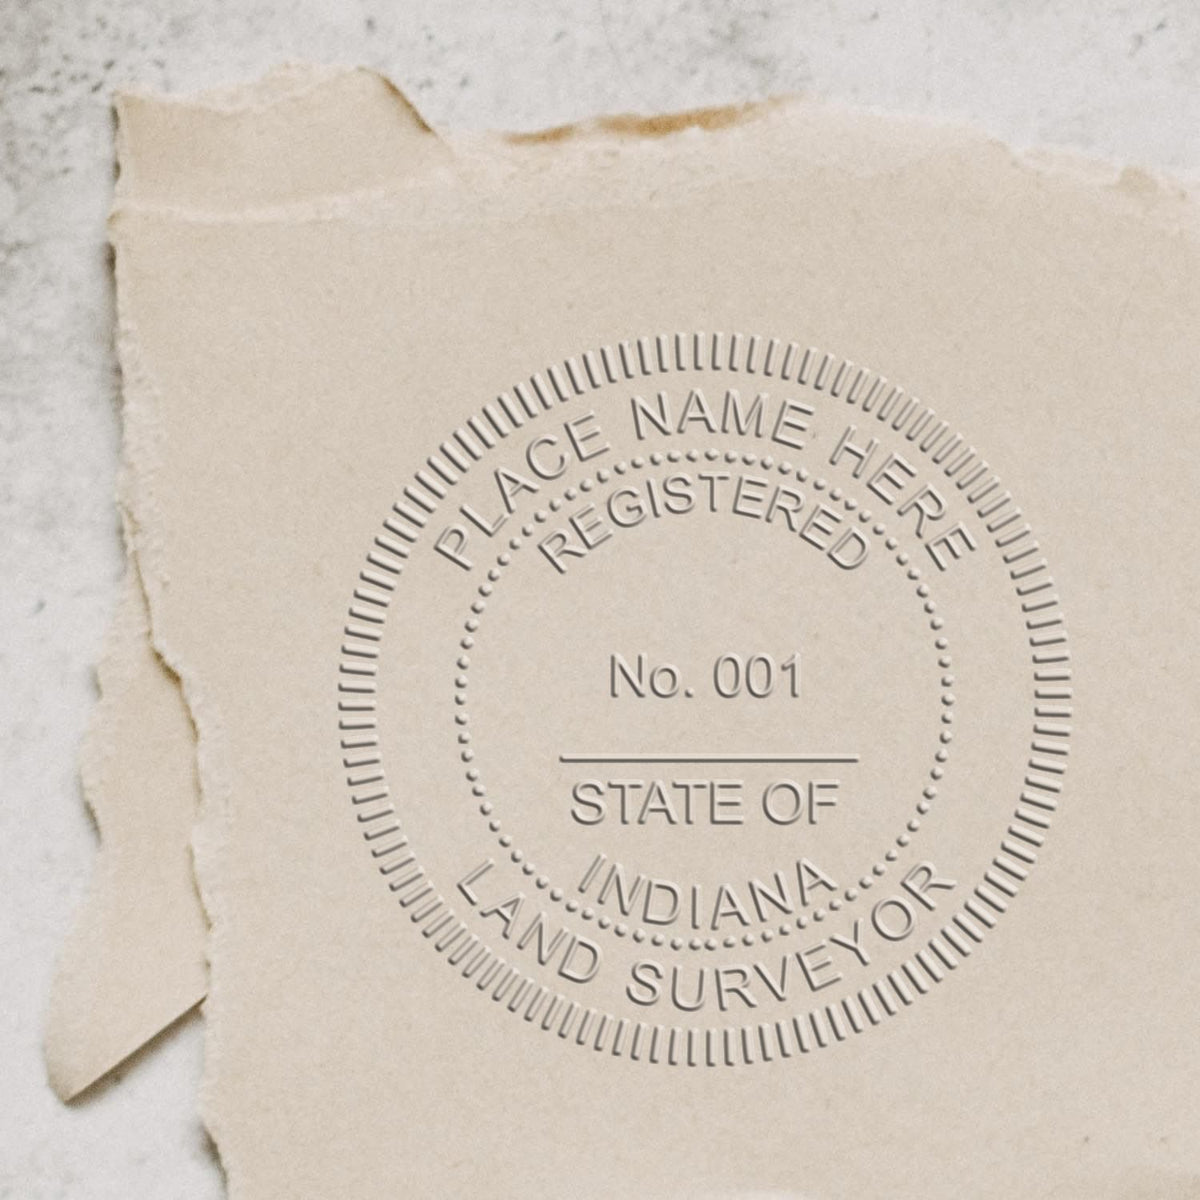 A photograph of the Hybrid Indiana Land Surveyor Seal stamp impression reveals a vivid, professional image of the on paper.